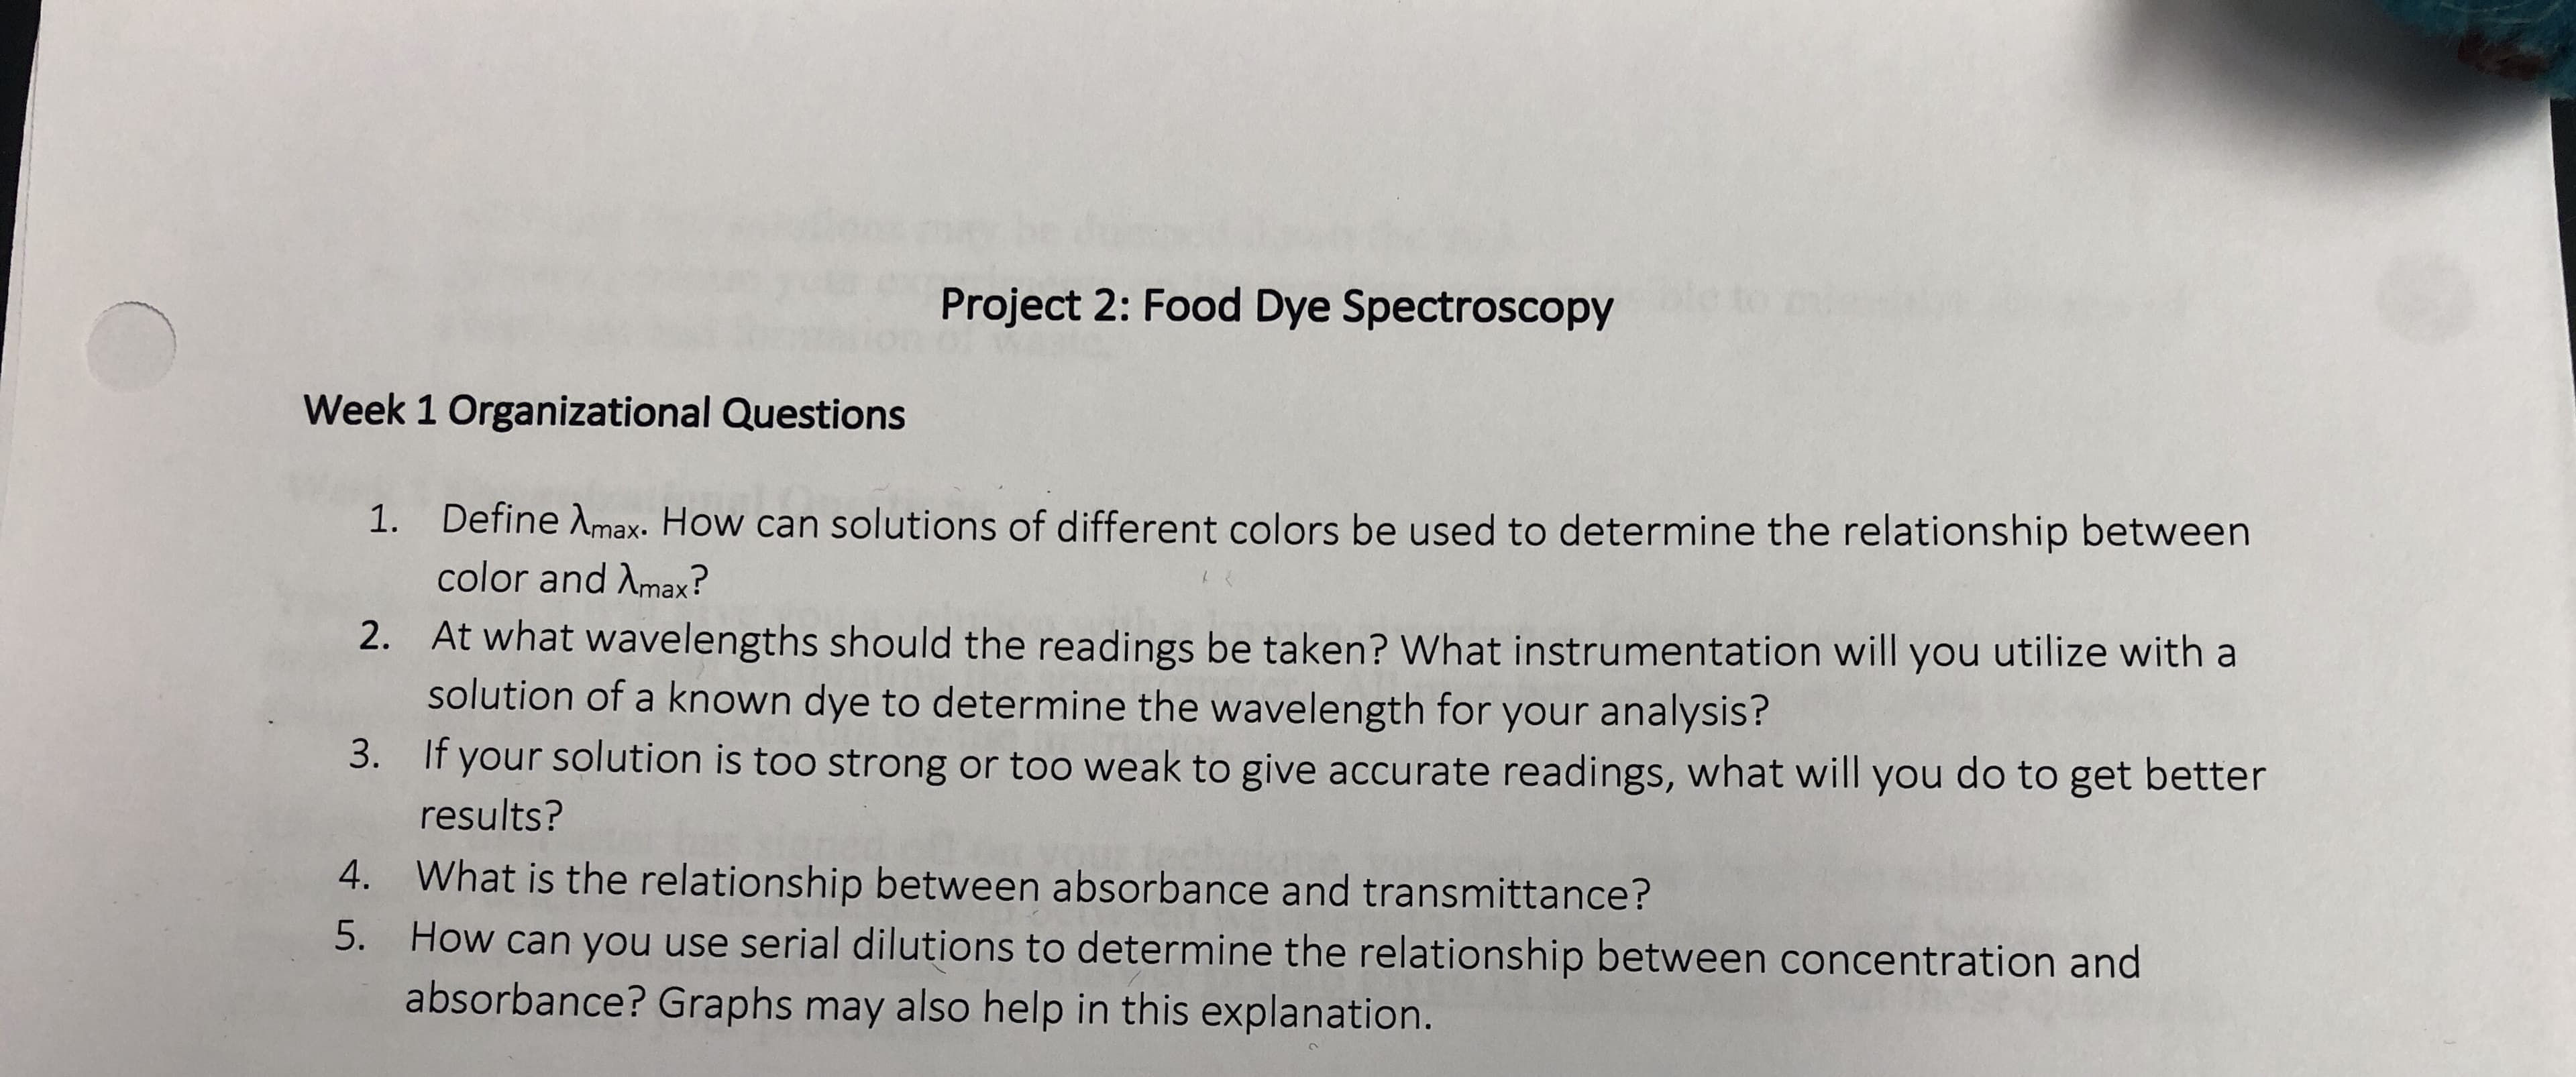 Project 2: Food Dye Spectroscopy
Week 1 Organizational Questions
Define λmax-How can solutions of different colors be used to determine the relationship between
color and Amax?
1.
At what wavelengths should the readings be taken? What instrumentation will you utilize with a
solution of a known dye to determine the wavelength for your analysis?
If your solution is too strong or too weak to give accurate readings, what will you do to get better
2.
3.
results?
4. What is the relationship between absorbance and transmittance?
5. How can you use serial dilutions to determine the relationship between concentration and
absorbance? Graphs may also help in this explanation.
